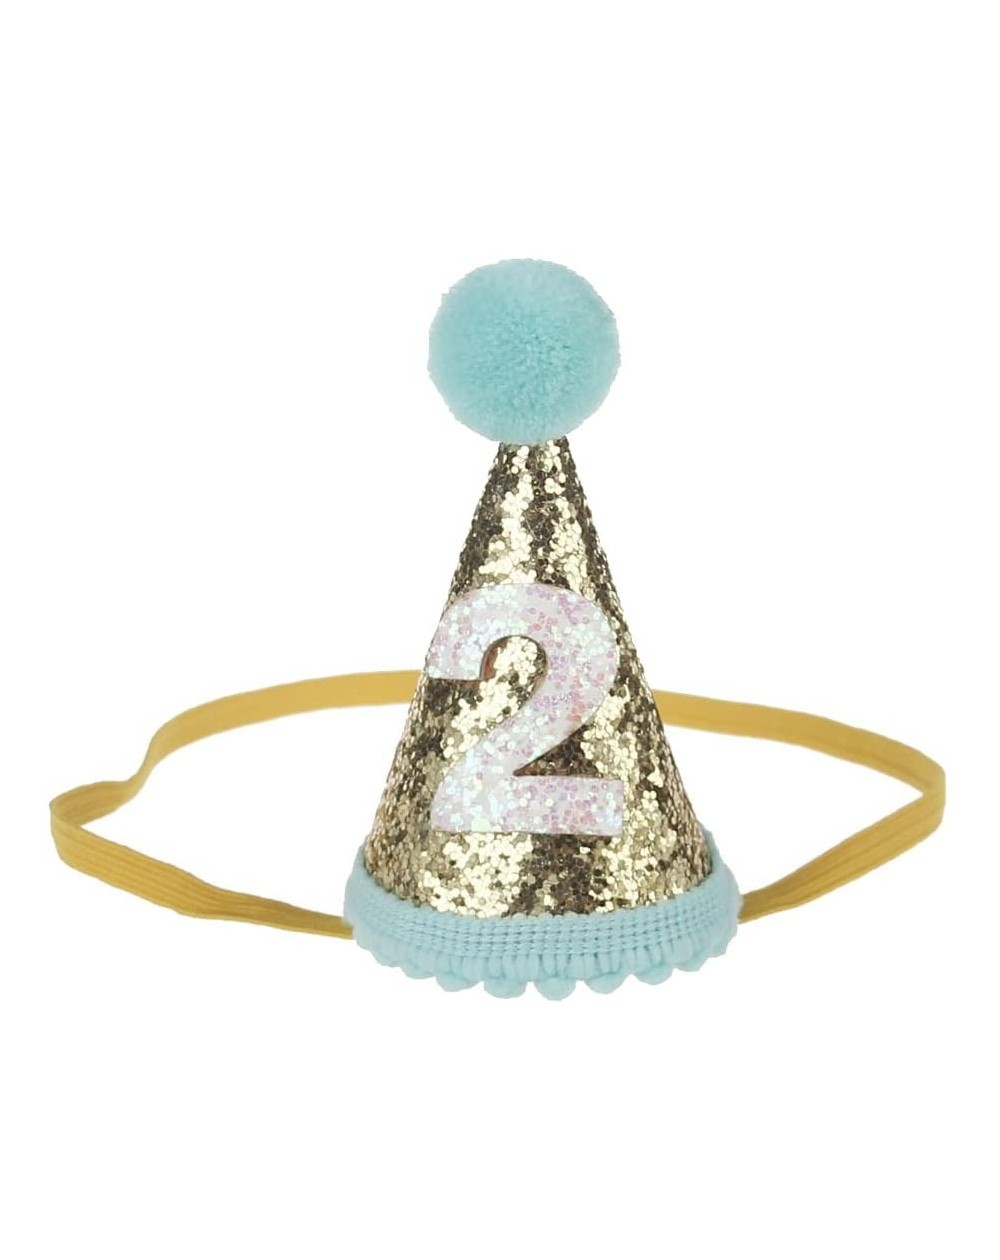 Party Hats Glitter Dog First Birthday Cone Hat Mini Doggy Cat Kitty Birthday Party Hats - Mint Gold 2 - CG1803EN975 $8.99